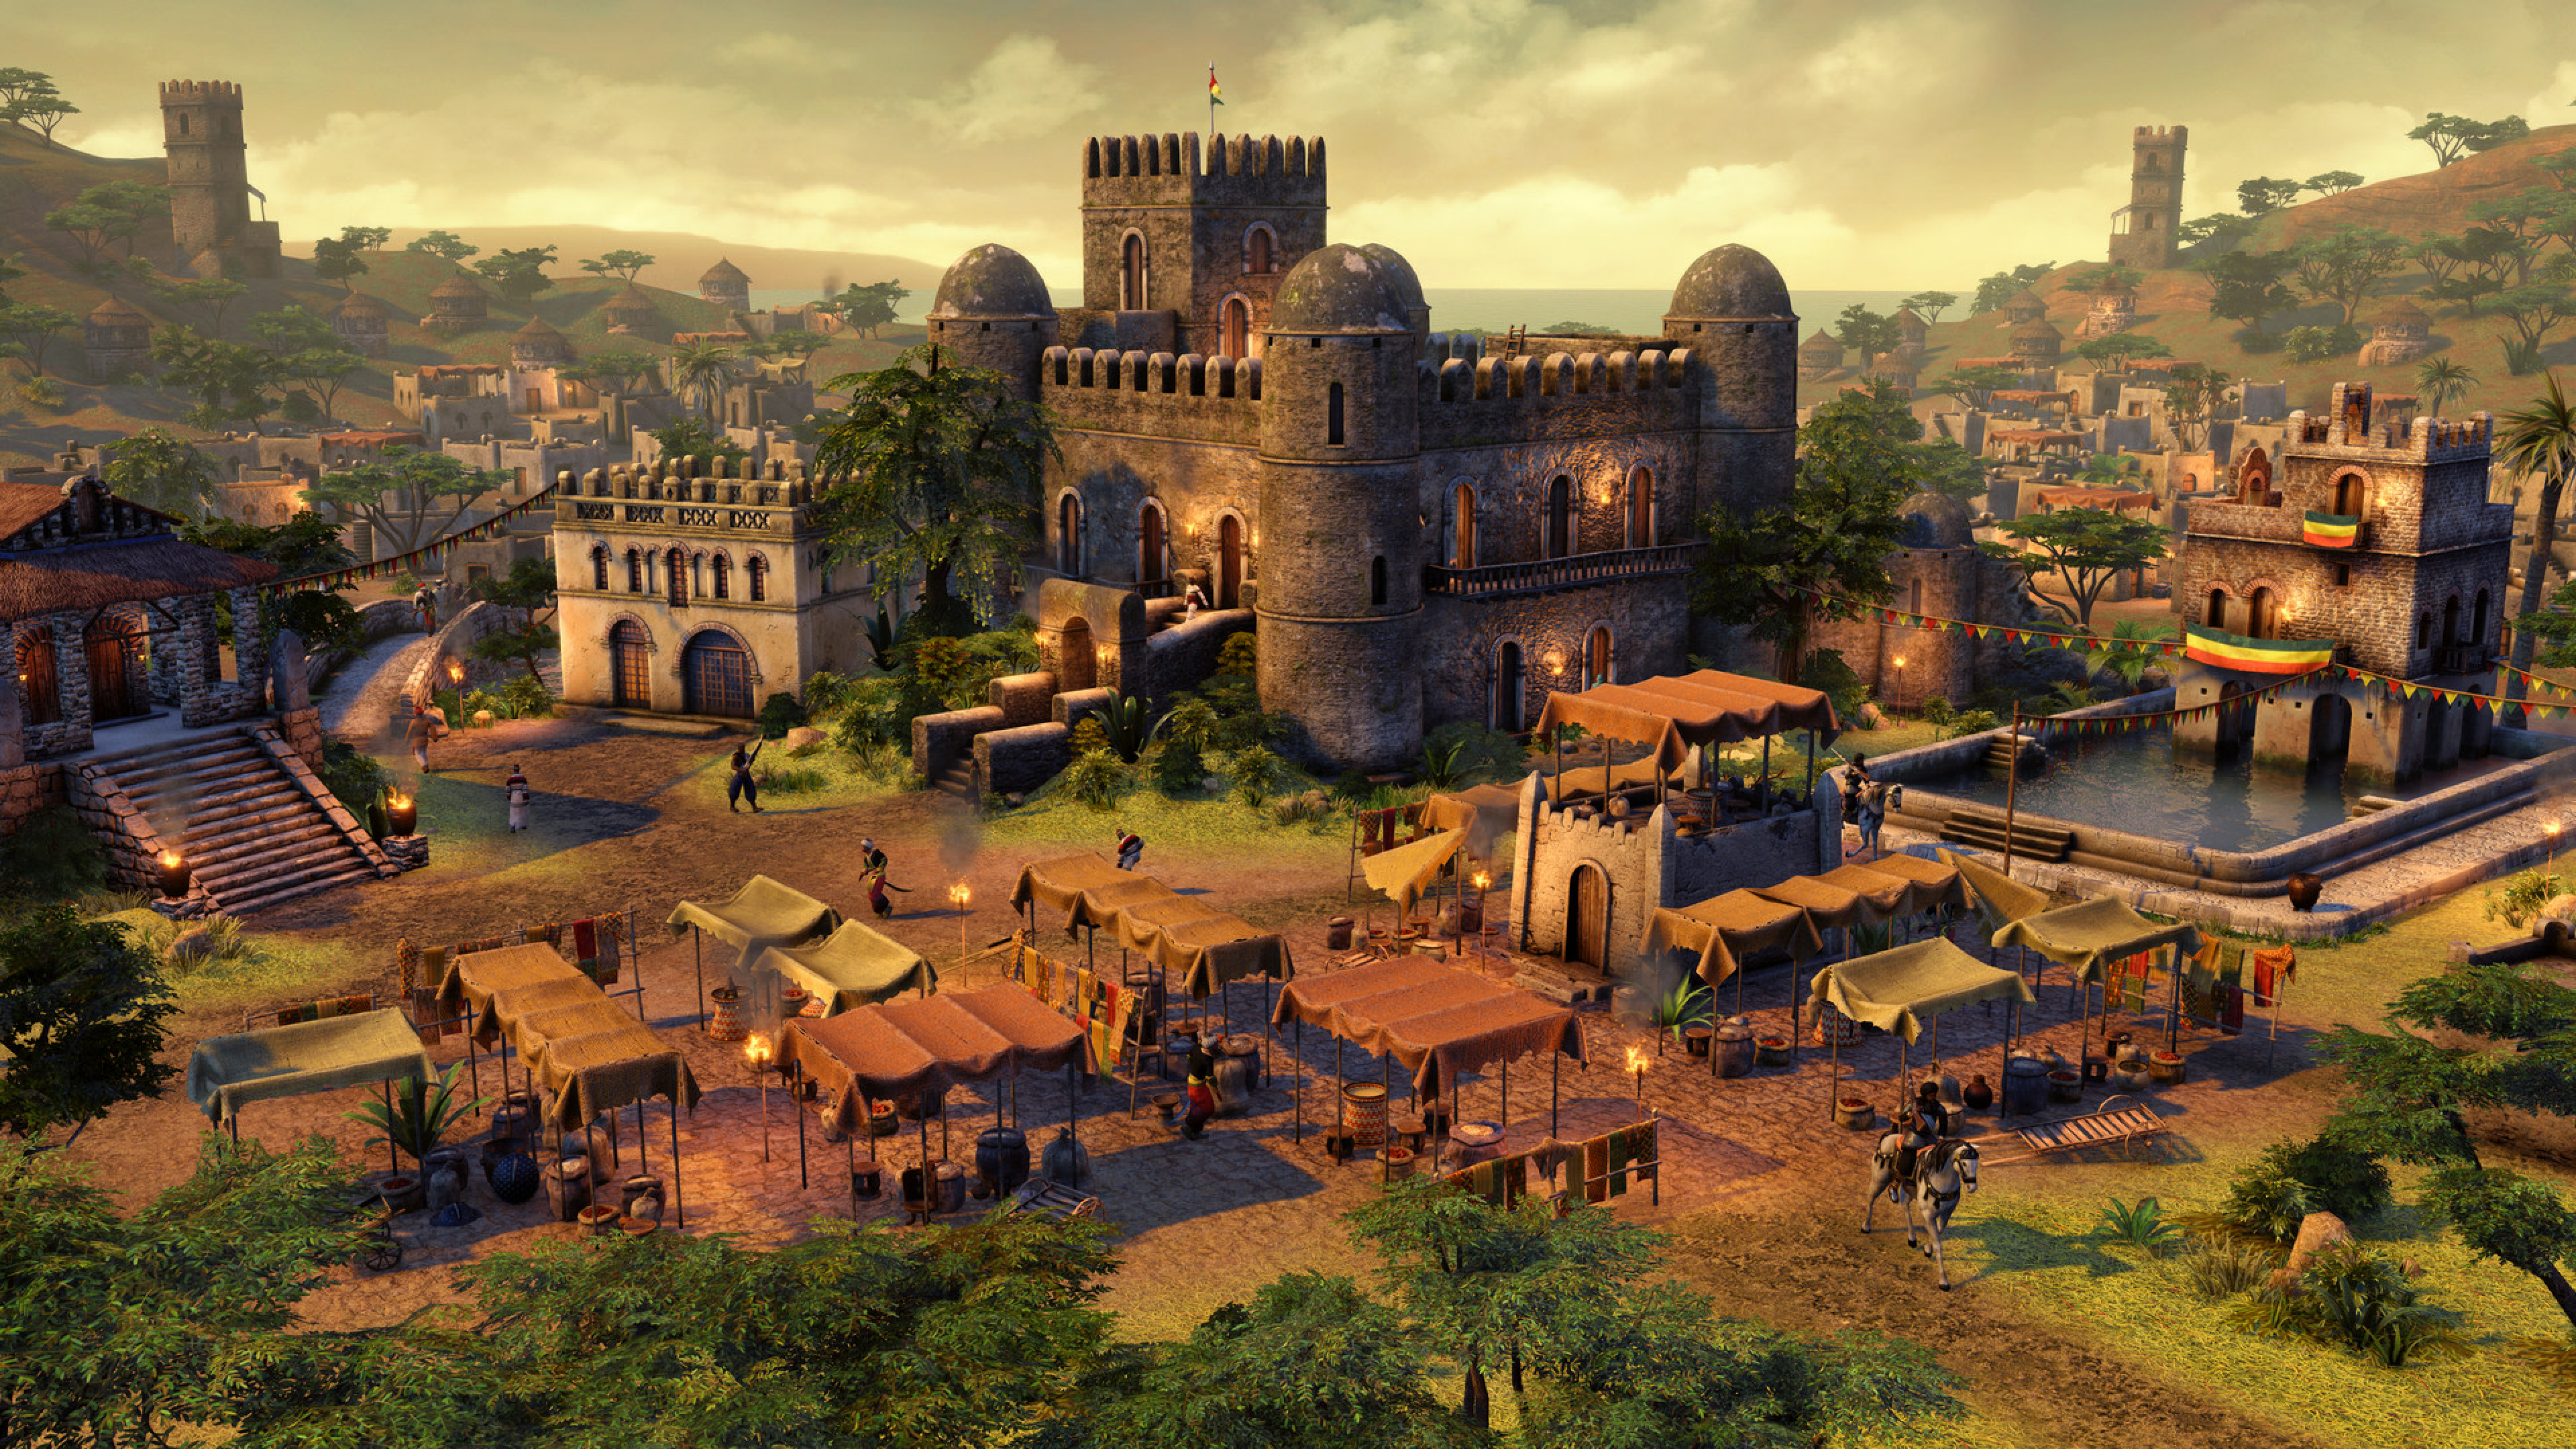 Remastering Age of Empires III Game assets and Cinematics | ZERO ONE